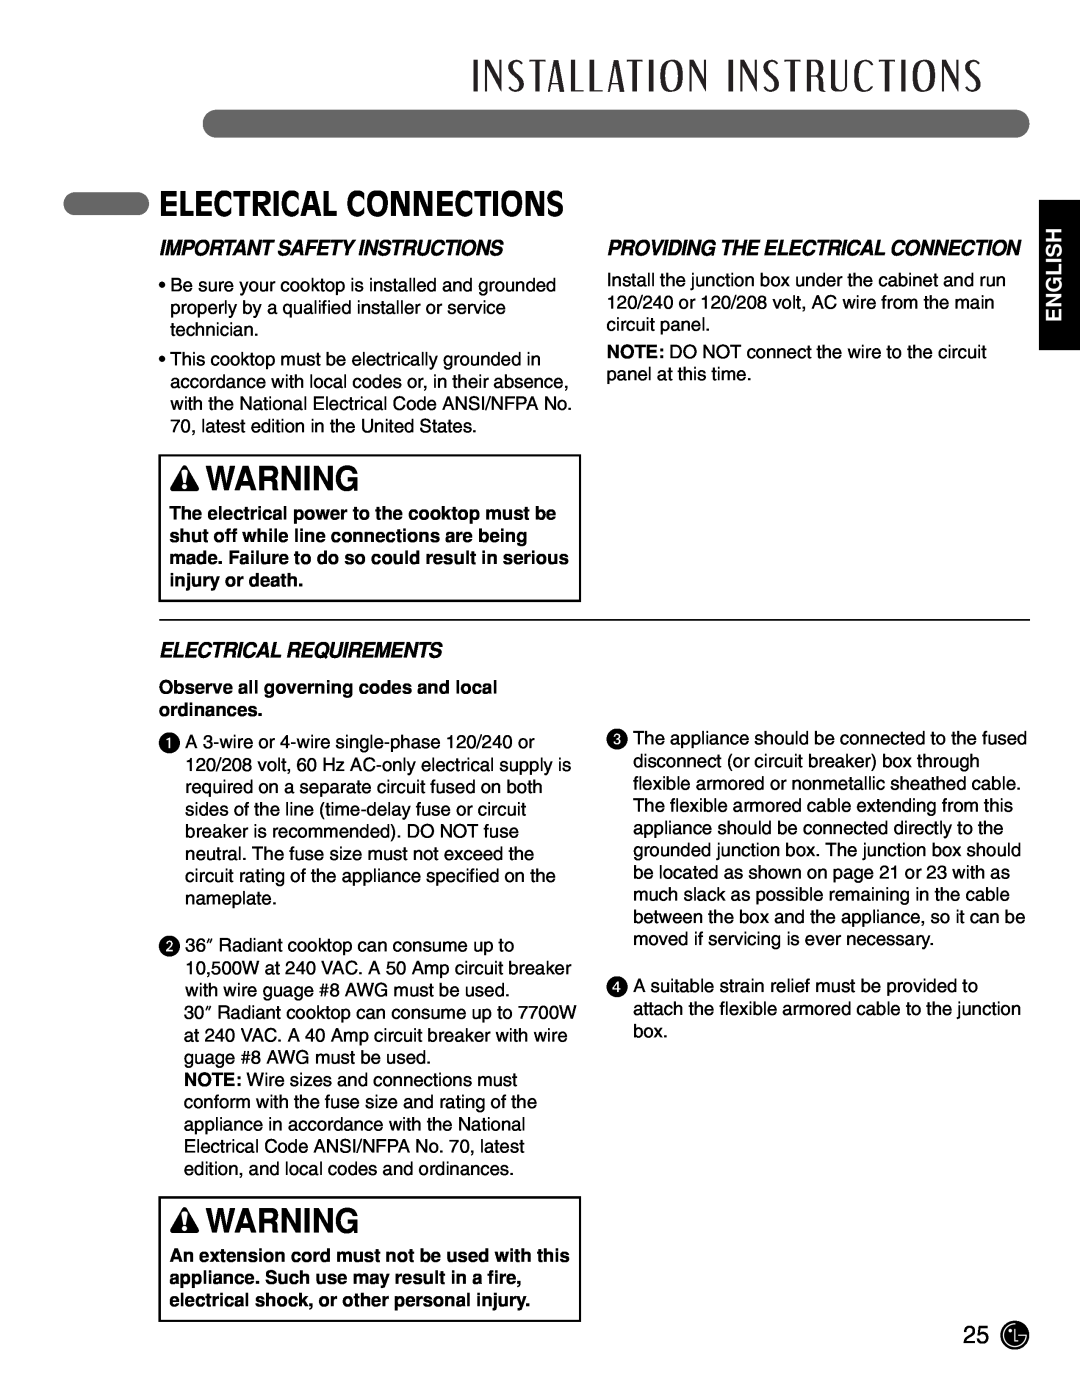 LG Electronics LCE3081ST manual Electrical Connections, Important Safety Instructions, Electrical Requirements, English 